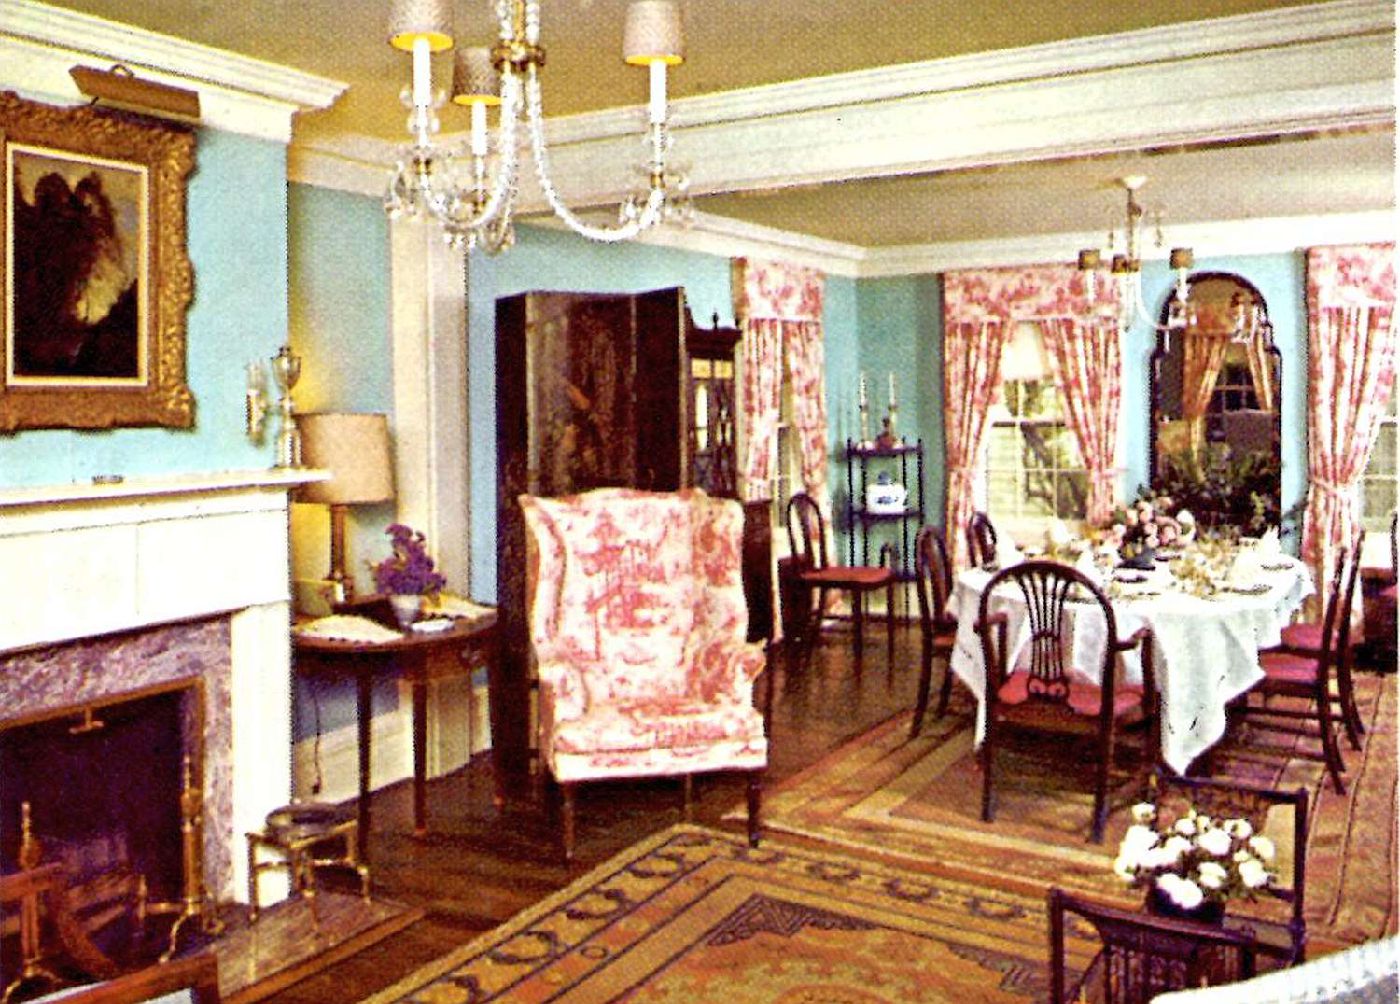 Living room and dining room at Reader's Digest guest house, 1977